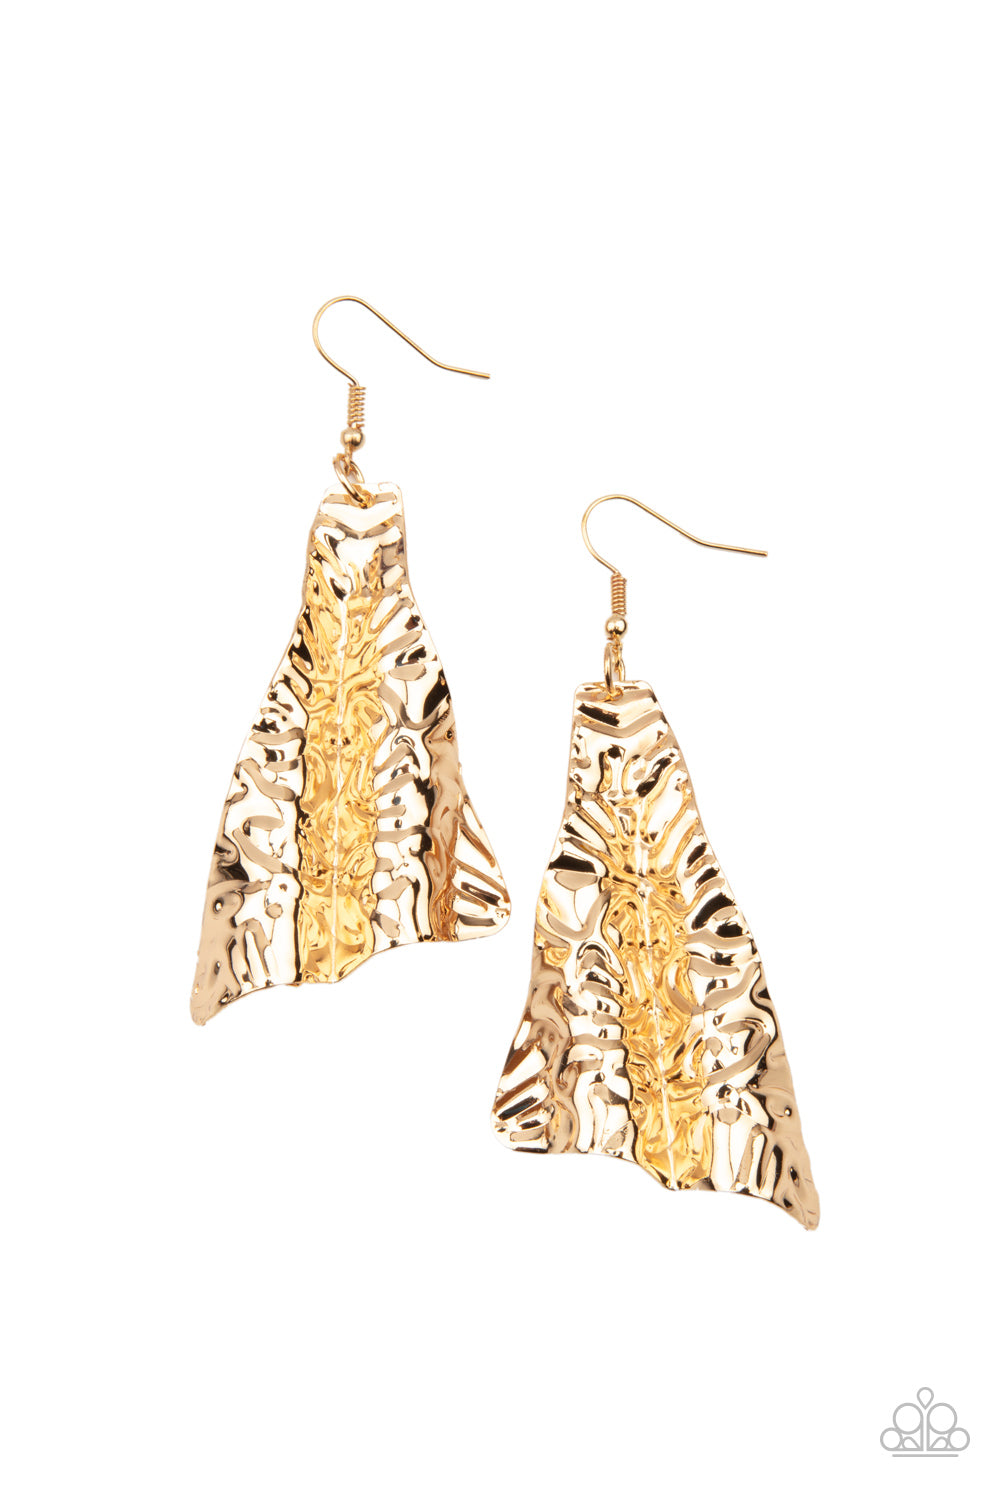 How FLARE You! Earrings - Gold